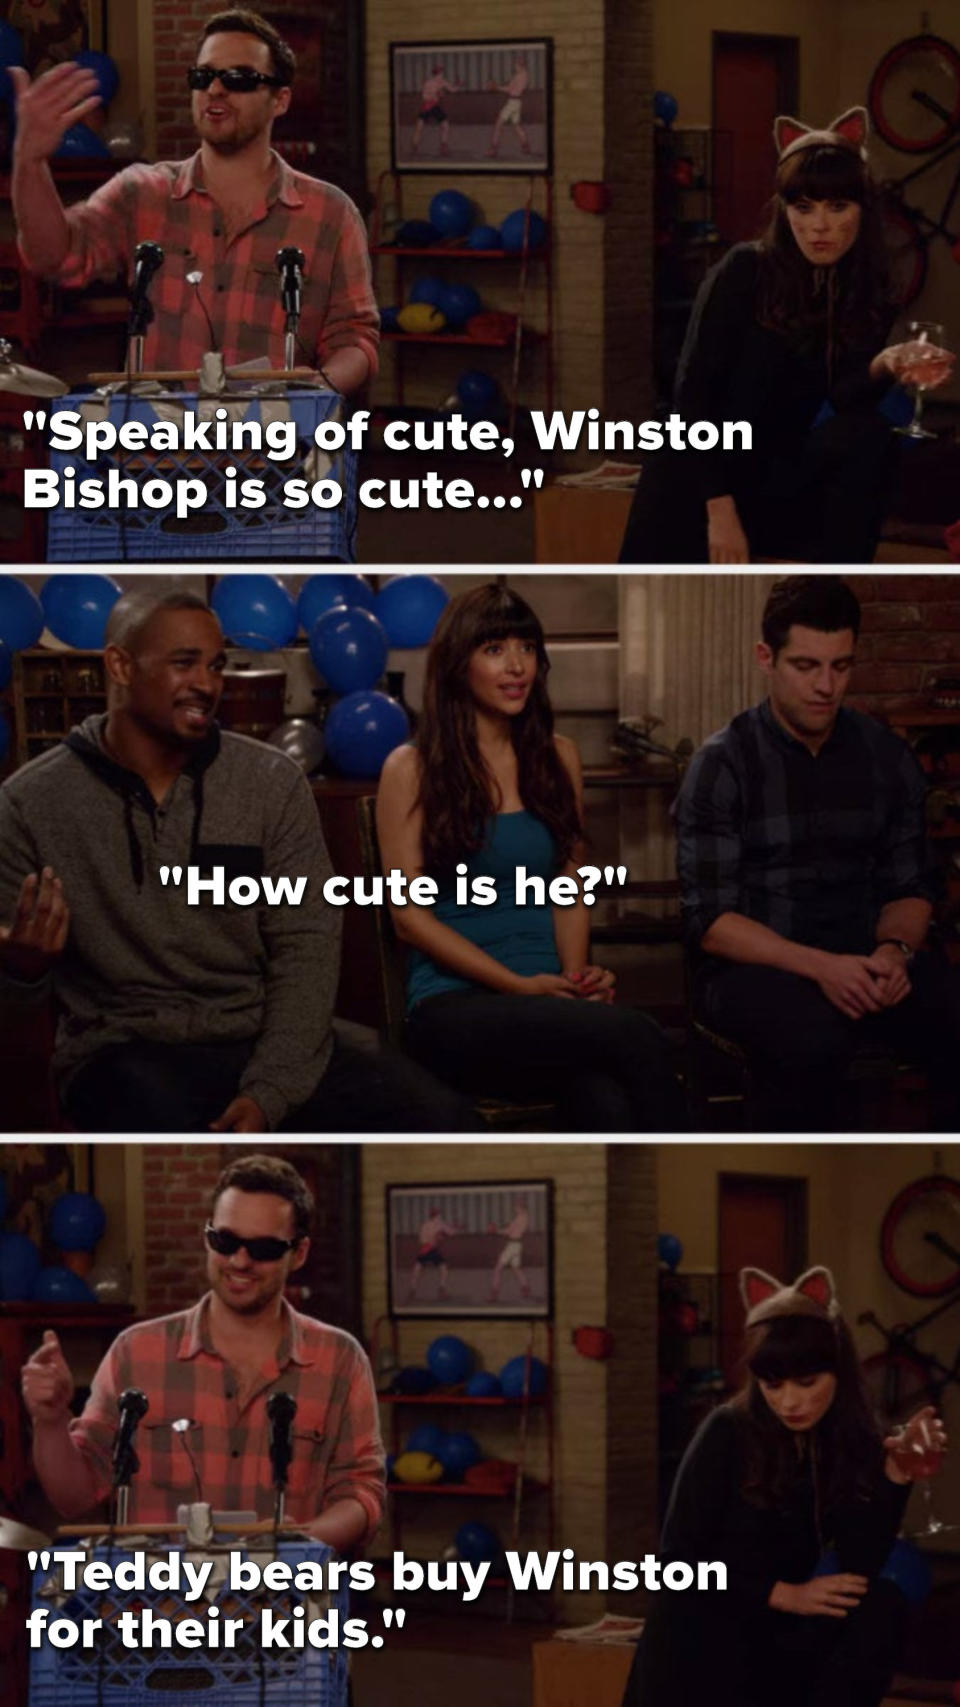 Nick says, "Speaking of cute, Winston Bishop is so cute," Cece, Coach, and Schmidt say, "How cute is he," and Nick says, "Teddy bears buy Winston for their kids?